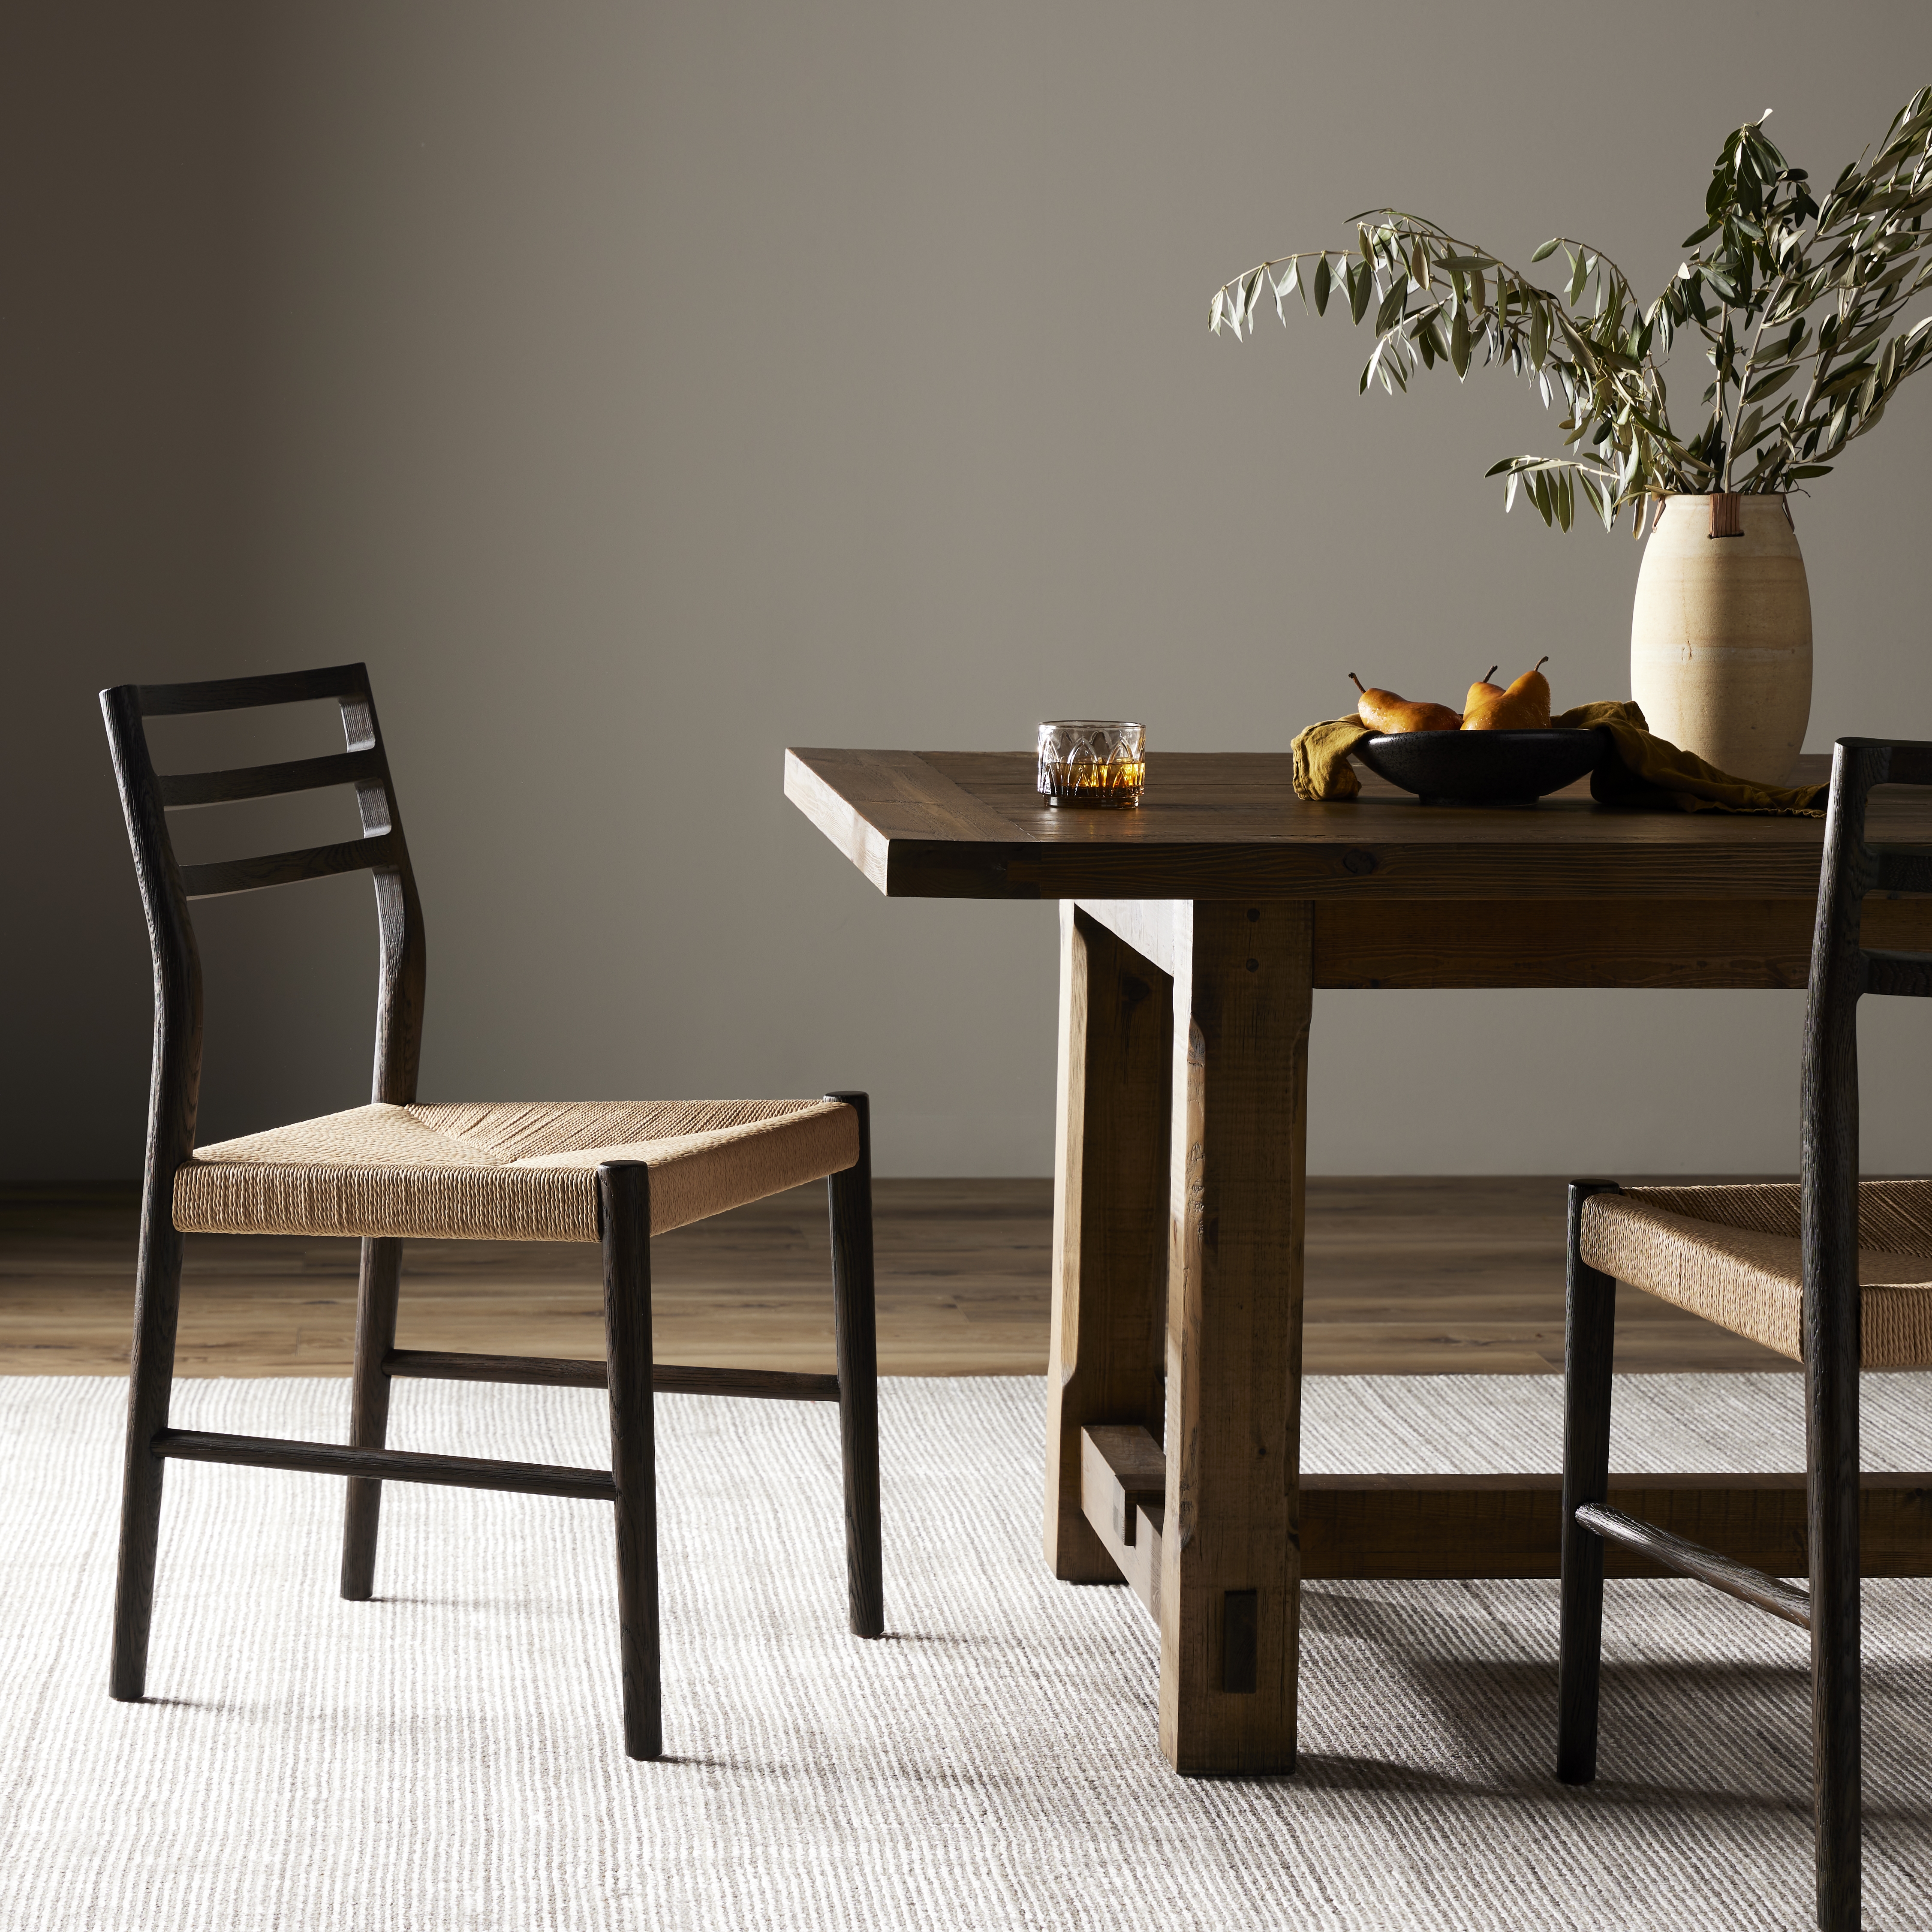 Glenmore Woven Dining Chair-Light Carbon - Image 11